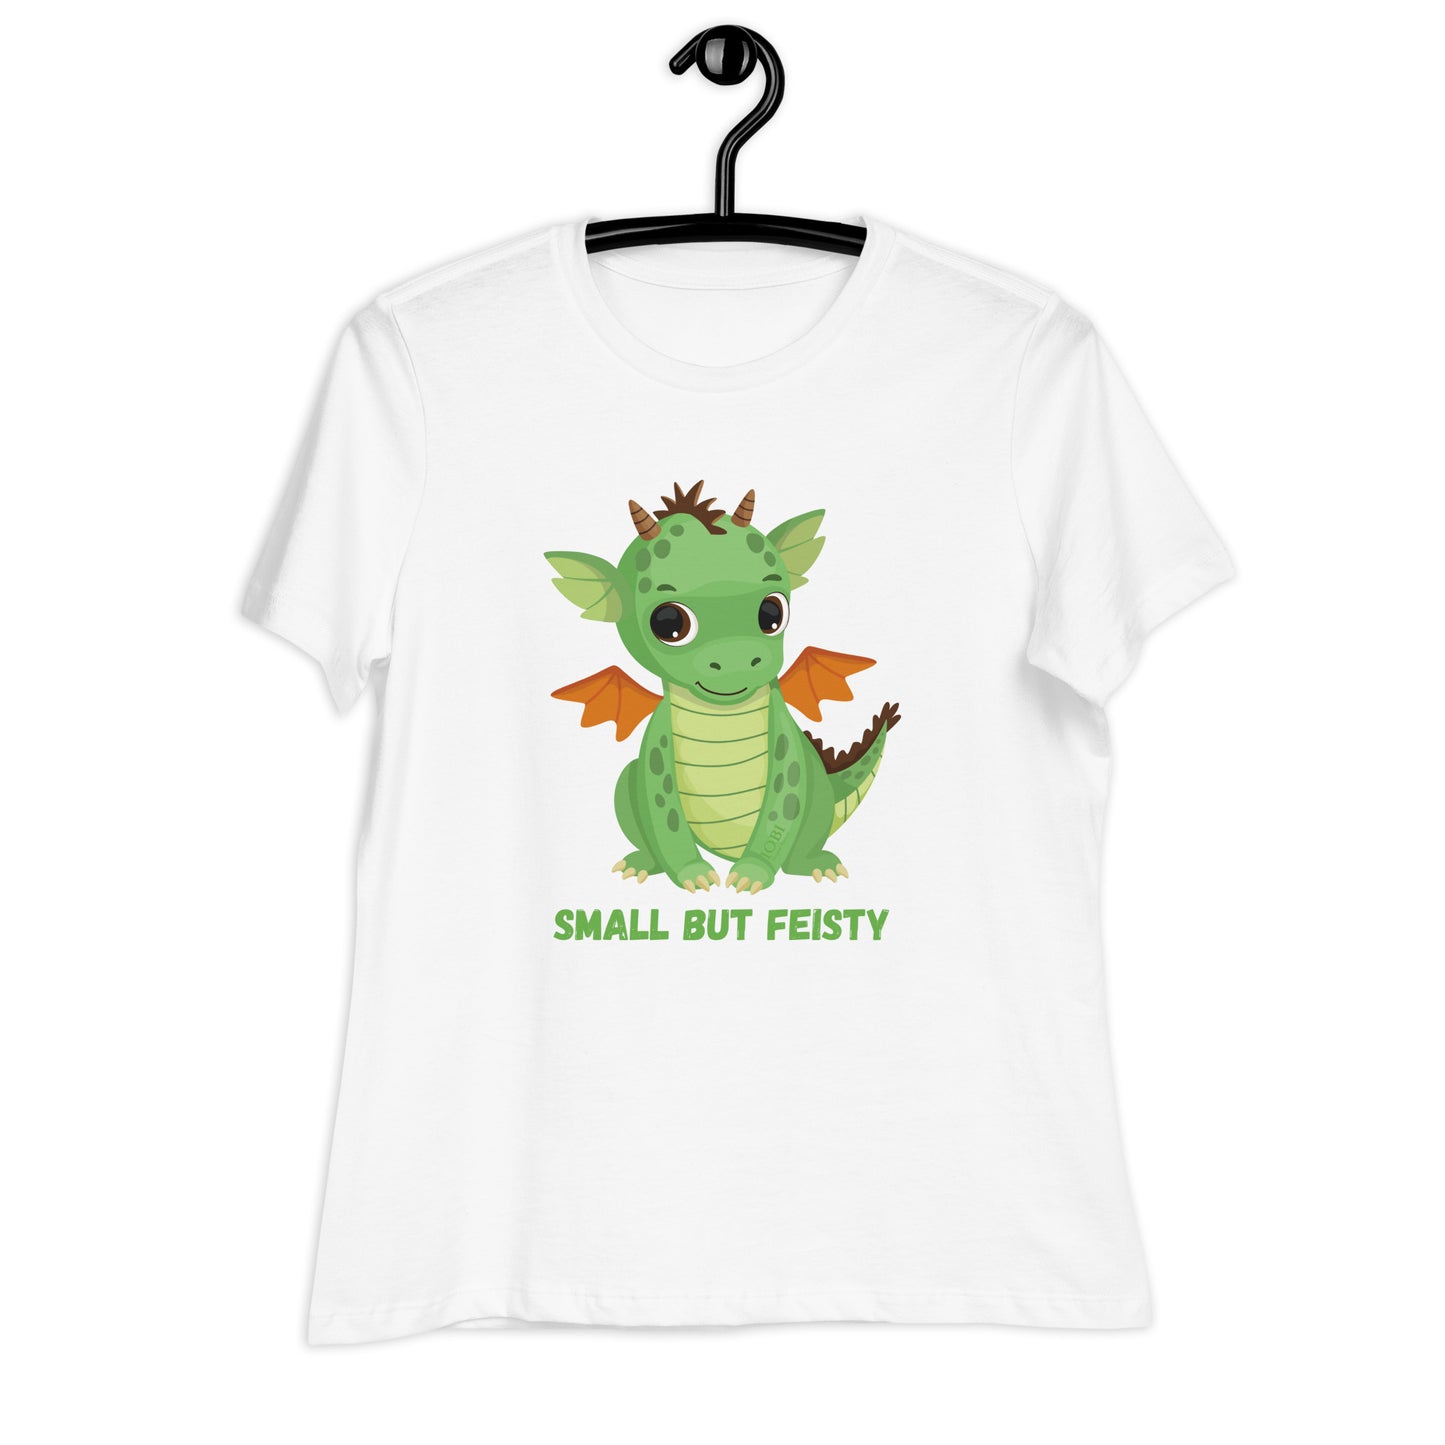 Women's Relaxed Soft & Smooth Premium Quality T-Shirt Small But Feisty Dragon Design by IOBI Original Apparel